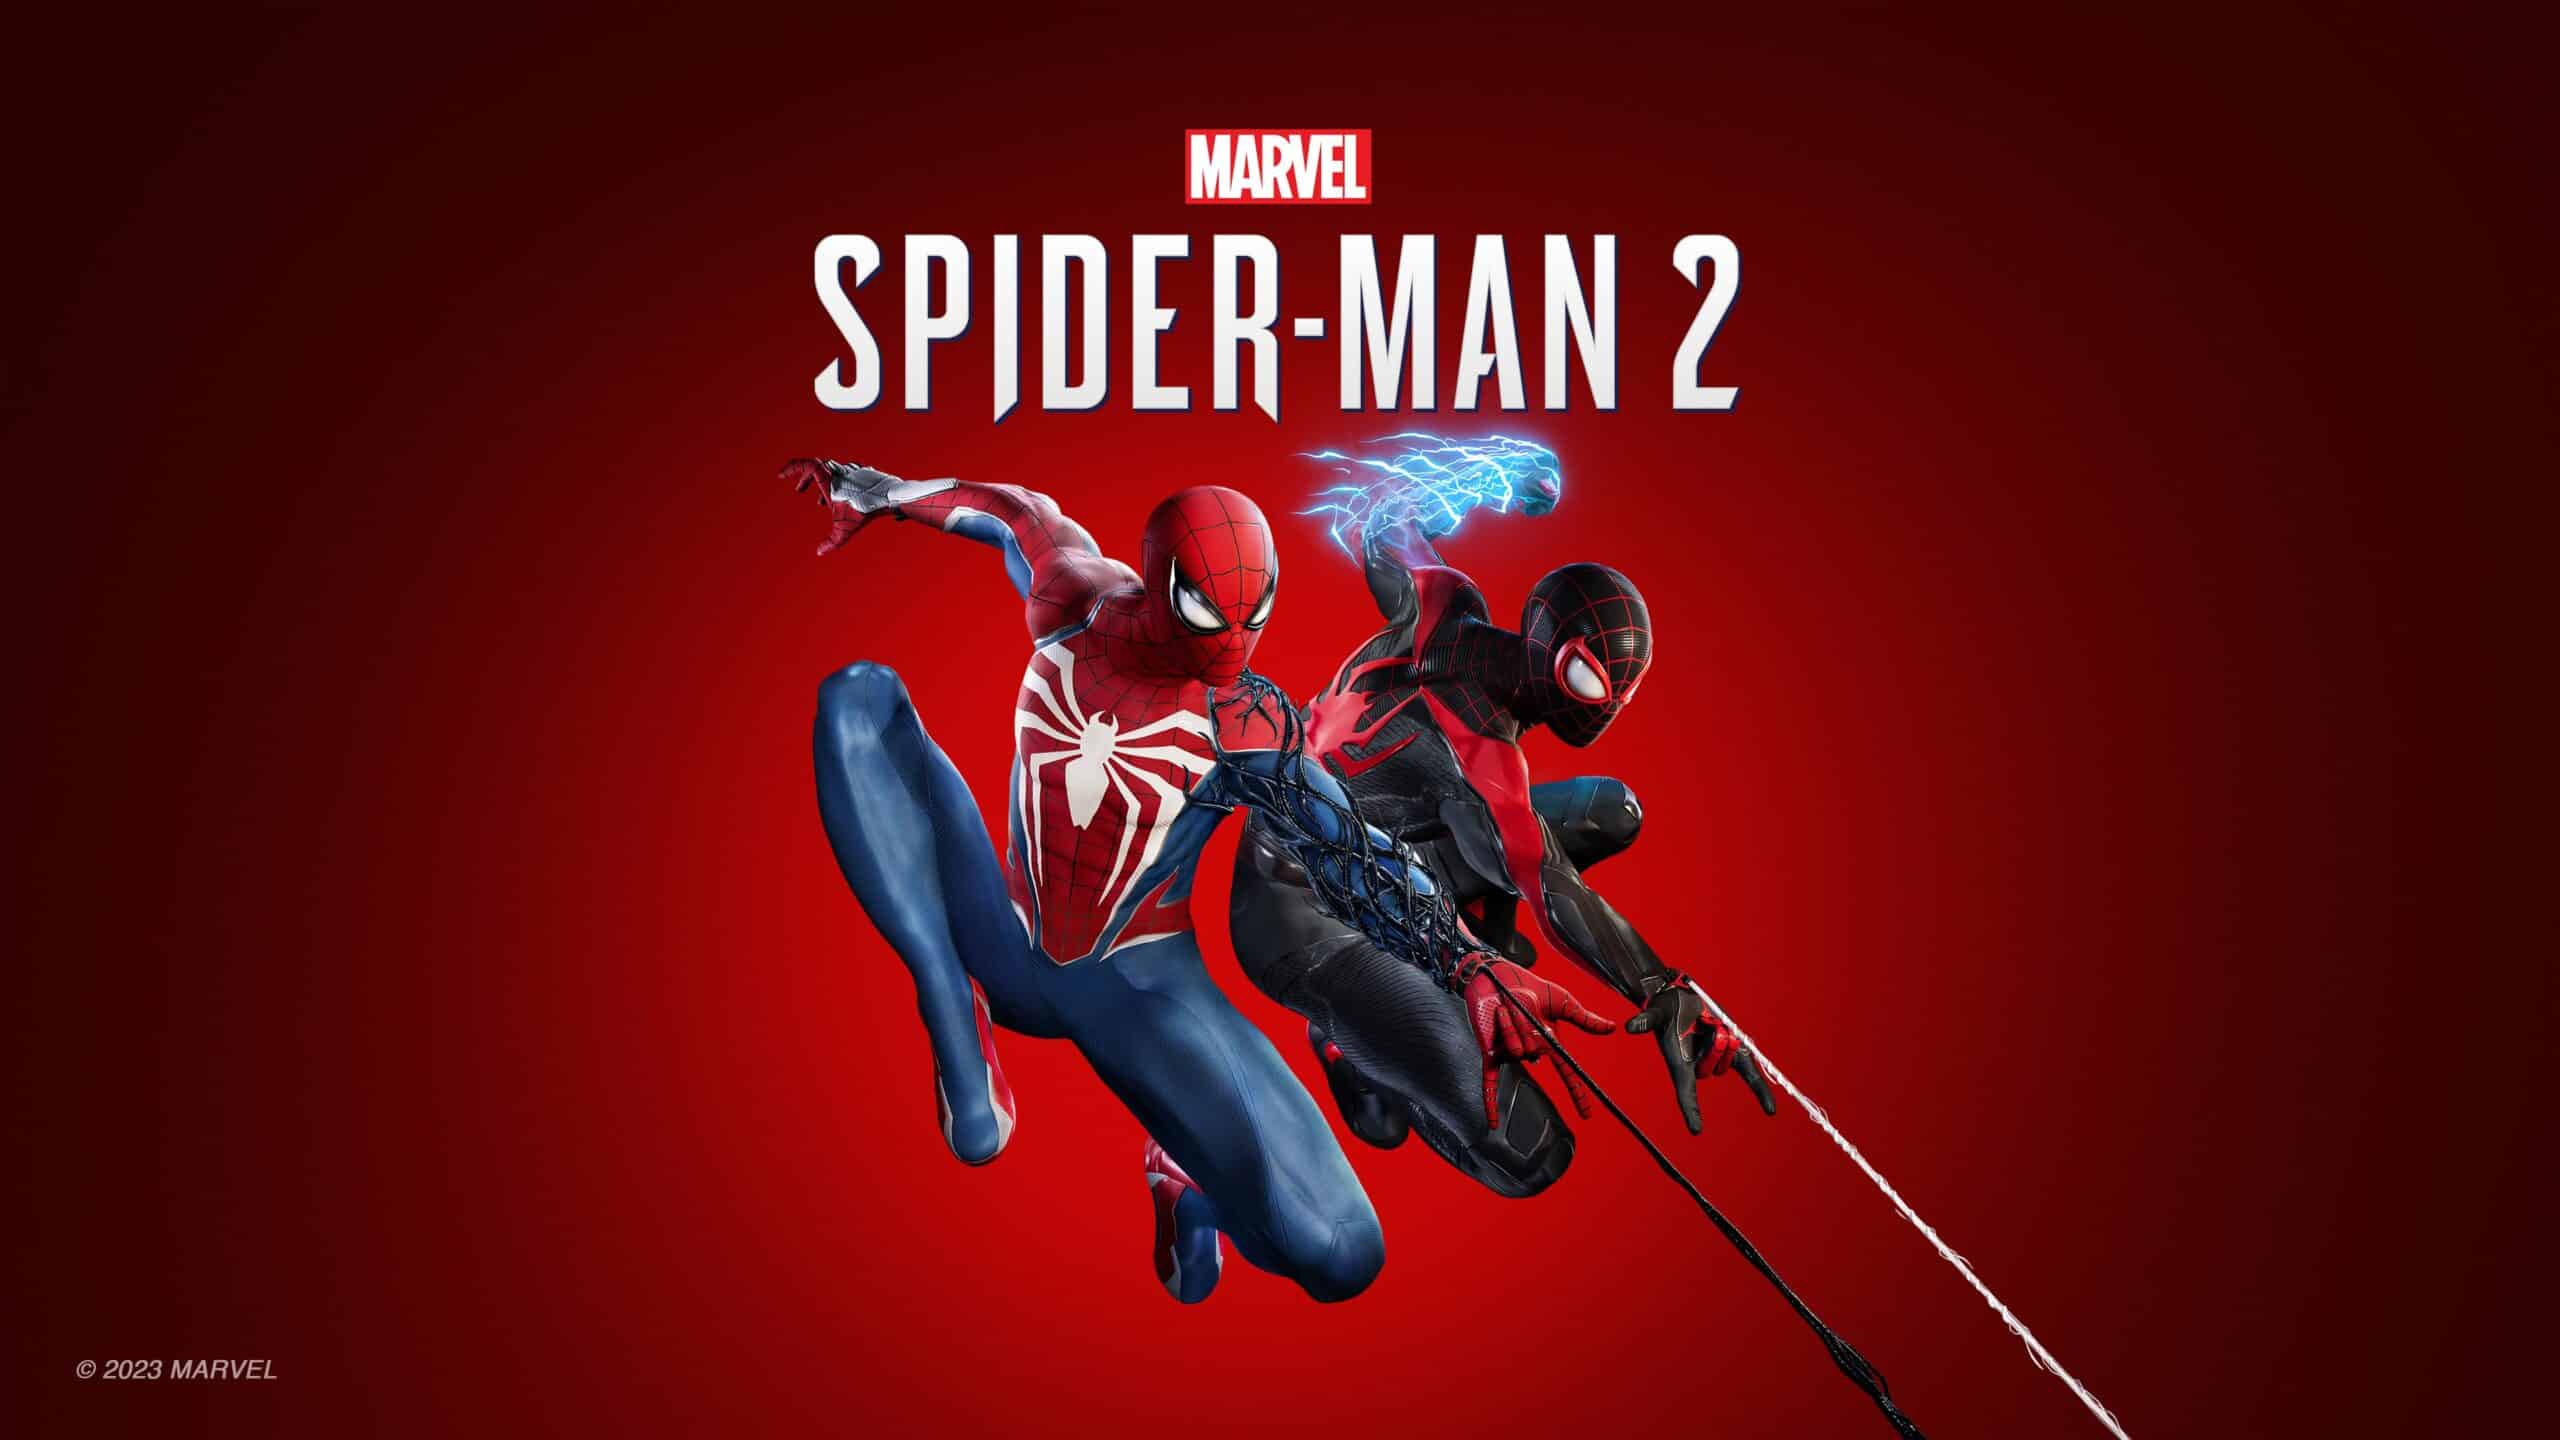 Marvel's Spider-Man 2 key art featuring the logo and the respective Spider-Men, Peter Parker and Miles Morales posing at the center.